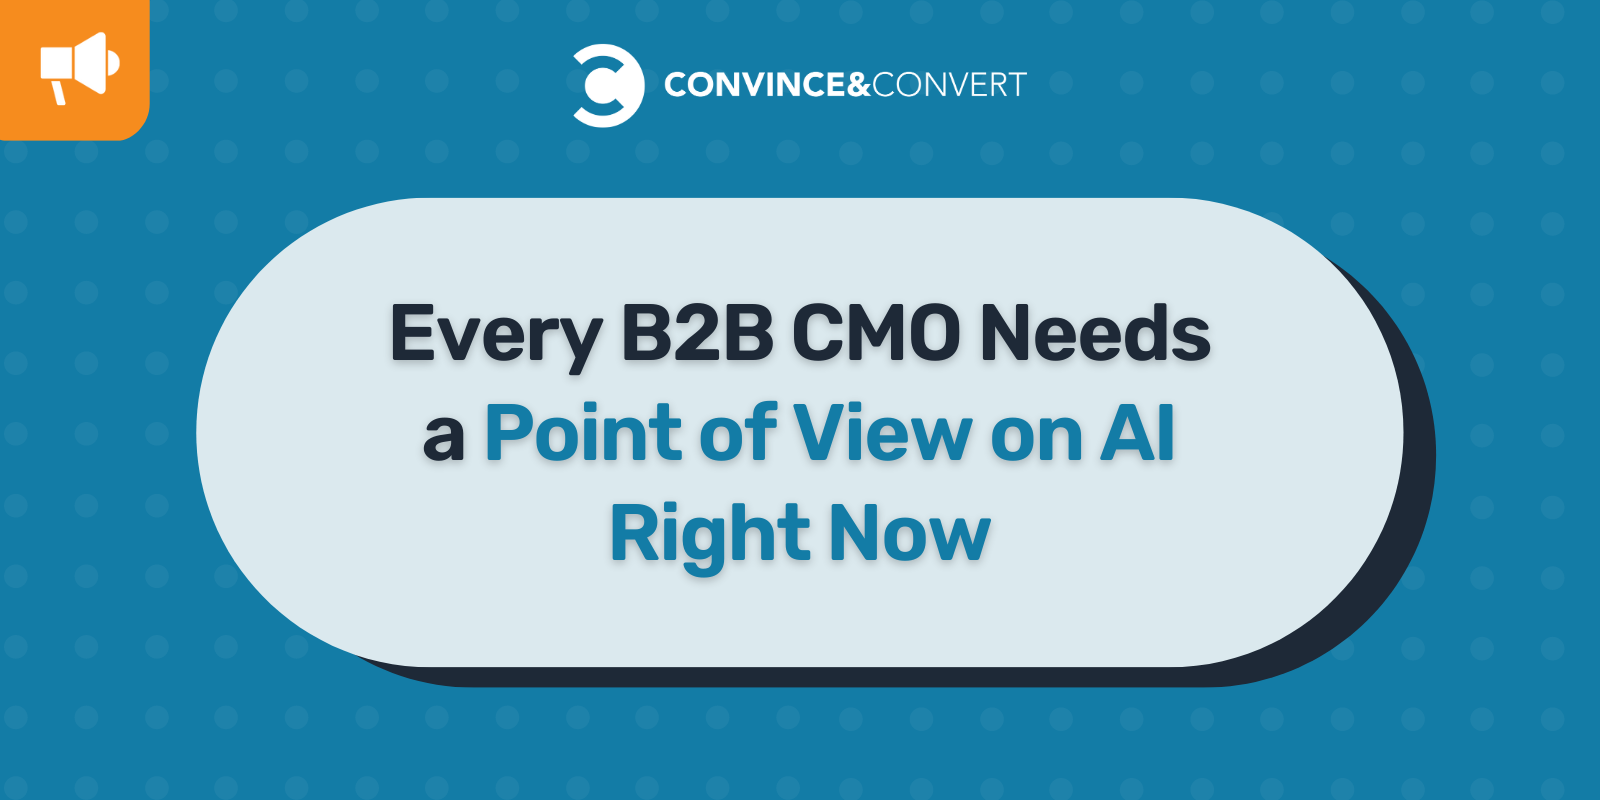 Every B2B CMO Needs a Point of View on AI Right Now